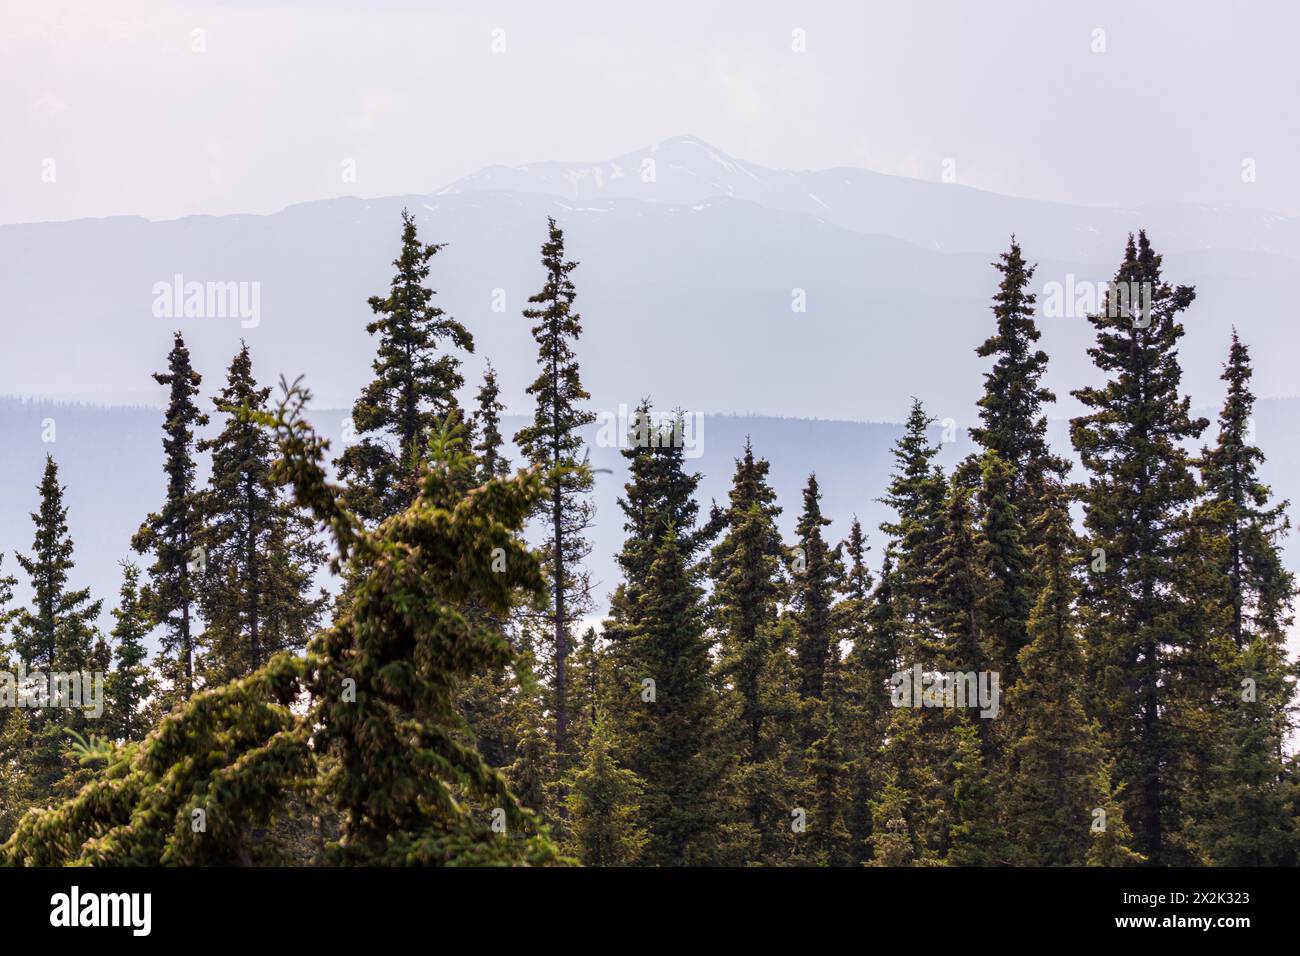 Wilderness of the boreal forest in northern Canada, Yukon Territory during summer time with poplar and birch trees. Overlooking mountain landscape. Stock Photo